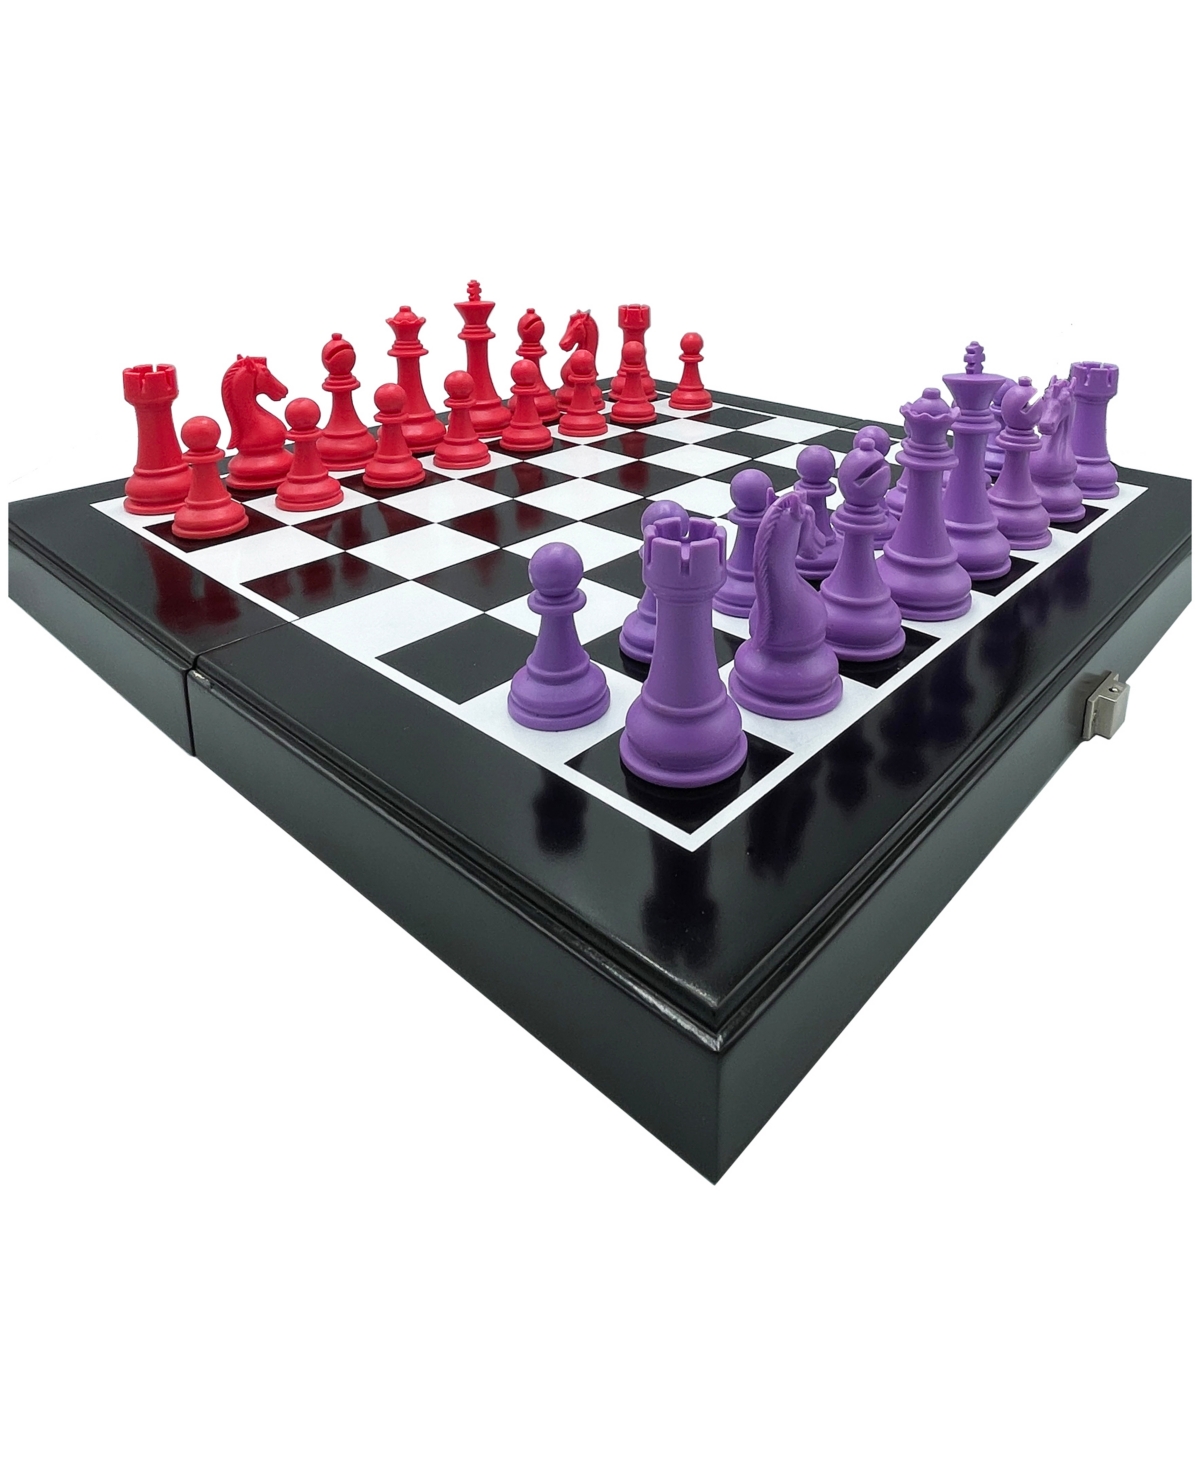 Shop Areyougame Chess A Timeless Classic Set, 35 Piece In Multi Color